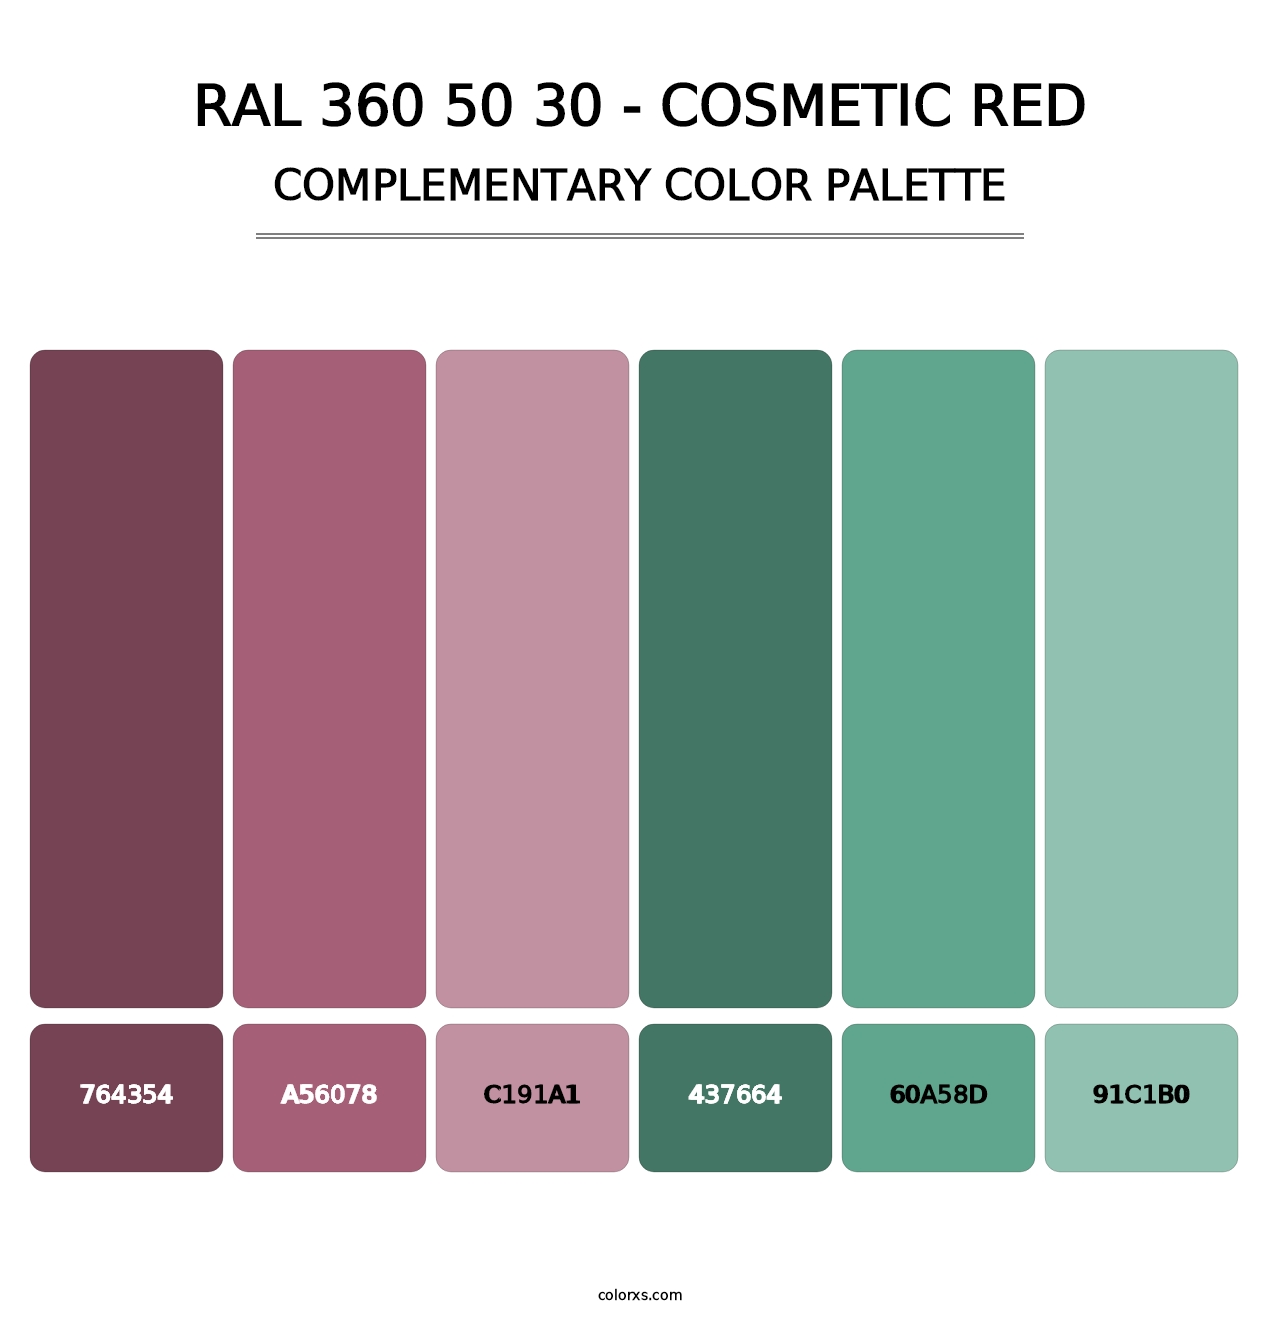 RAL 360 50 30 - Cosmetic Red - Complementary Color Palette